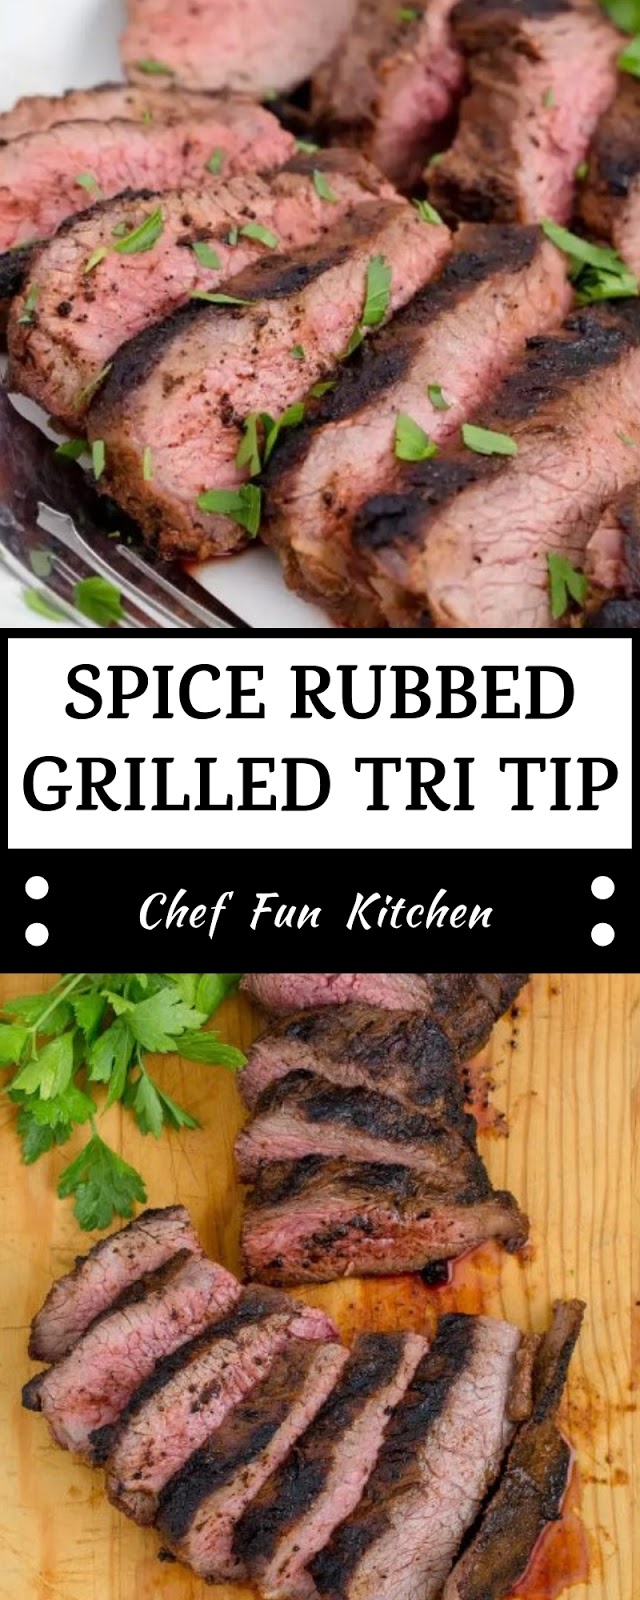 SPICE RUBBED GRILLED TRI TIP